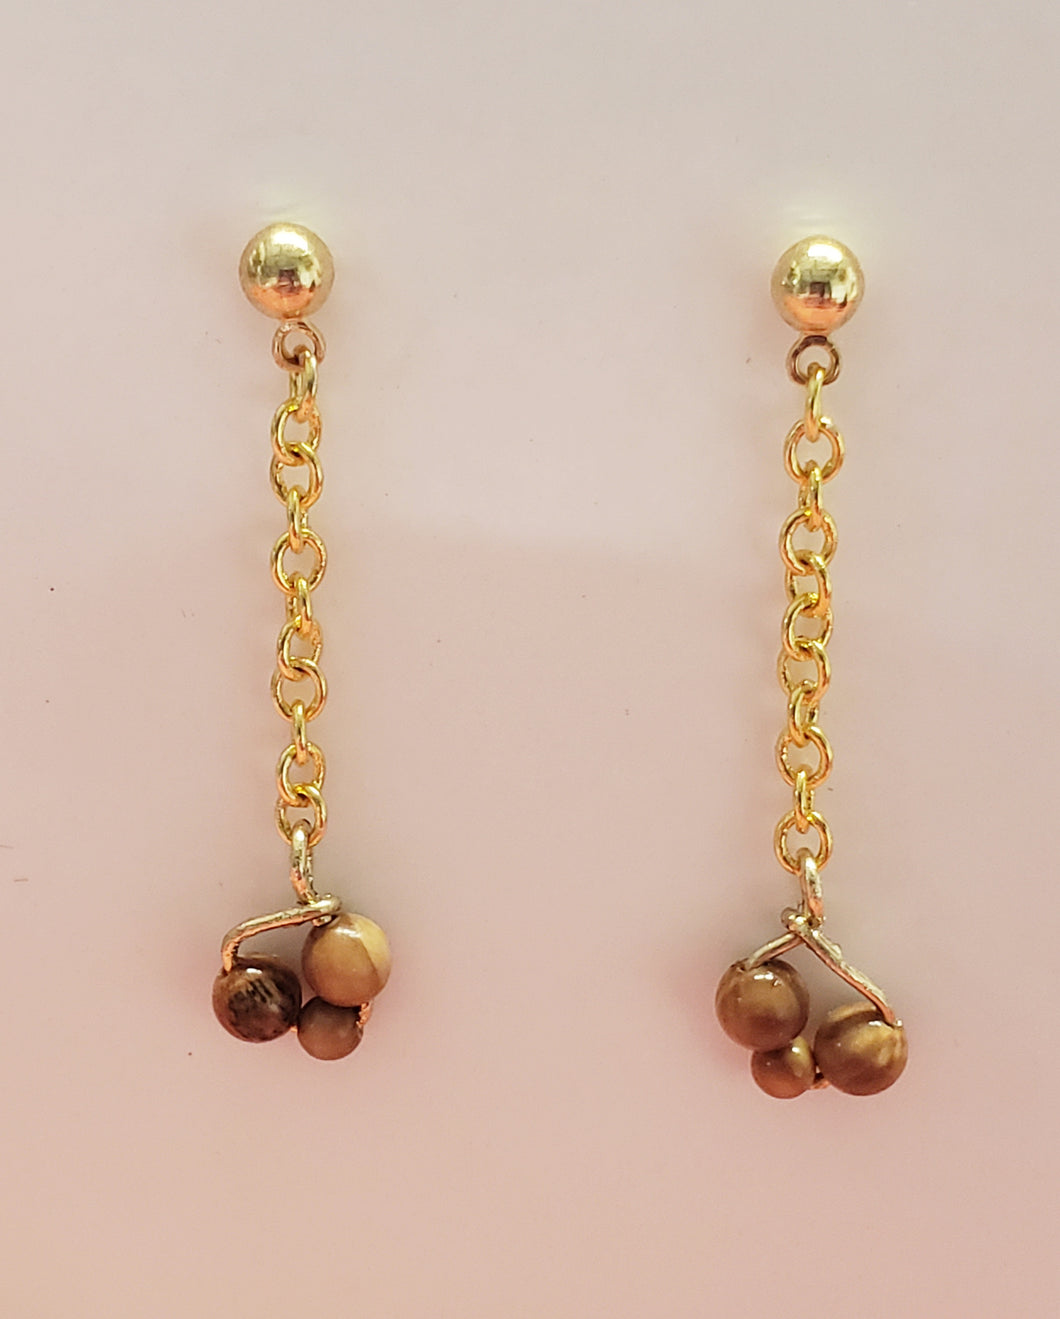 These 2 and 3 mm Mammoth Ivory bead earrings have been crafted from Fossil Mammoth Ivory found in Siberia. Their rich organic color is absorbed from the soil that they have laid in for close to 30,000 years.